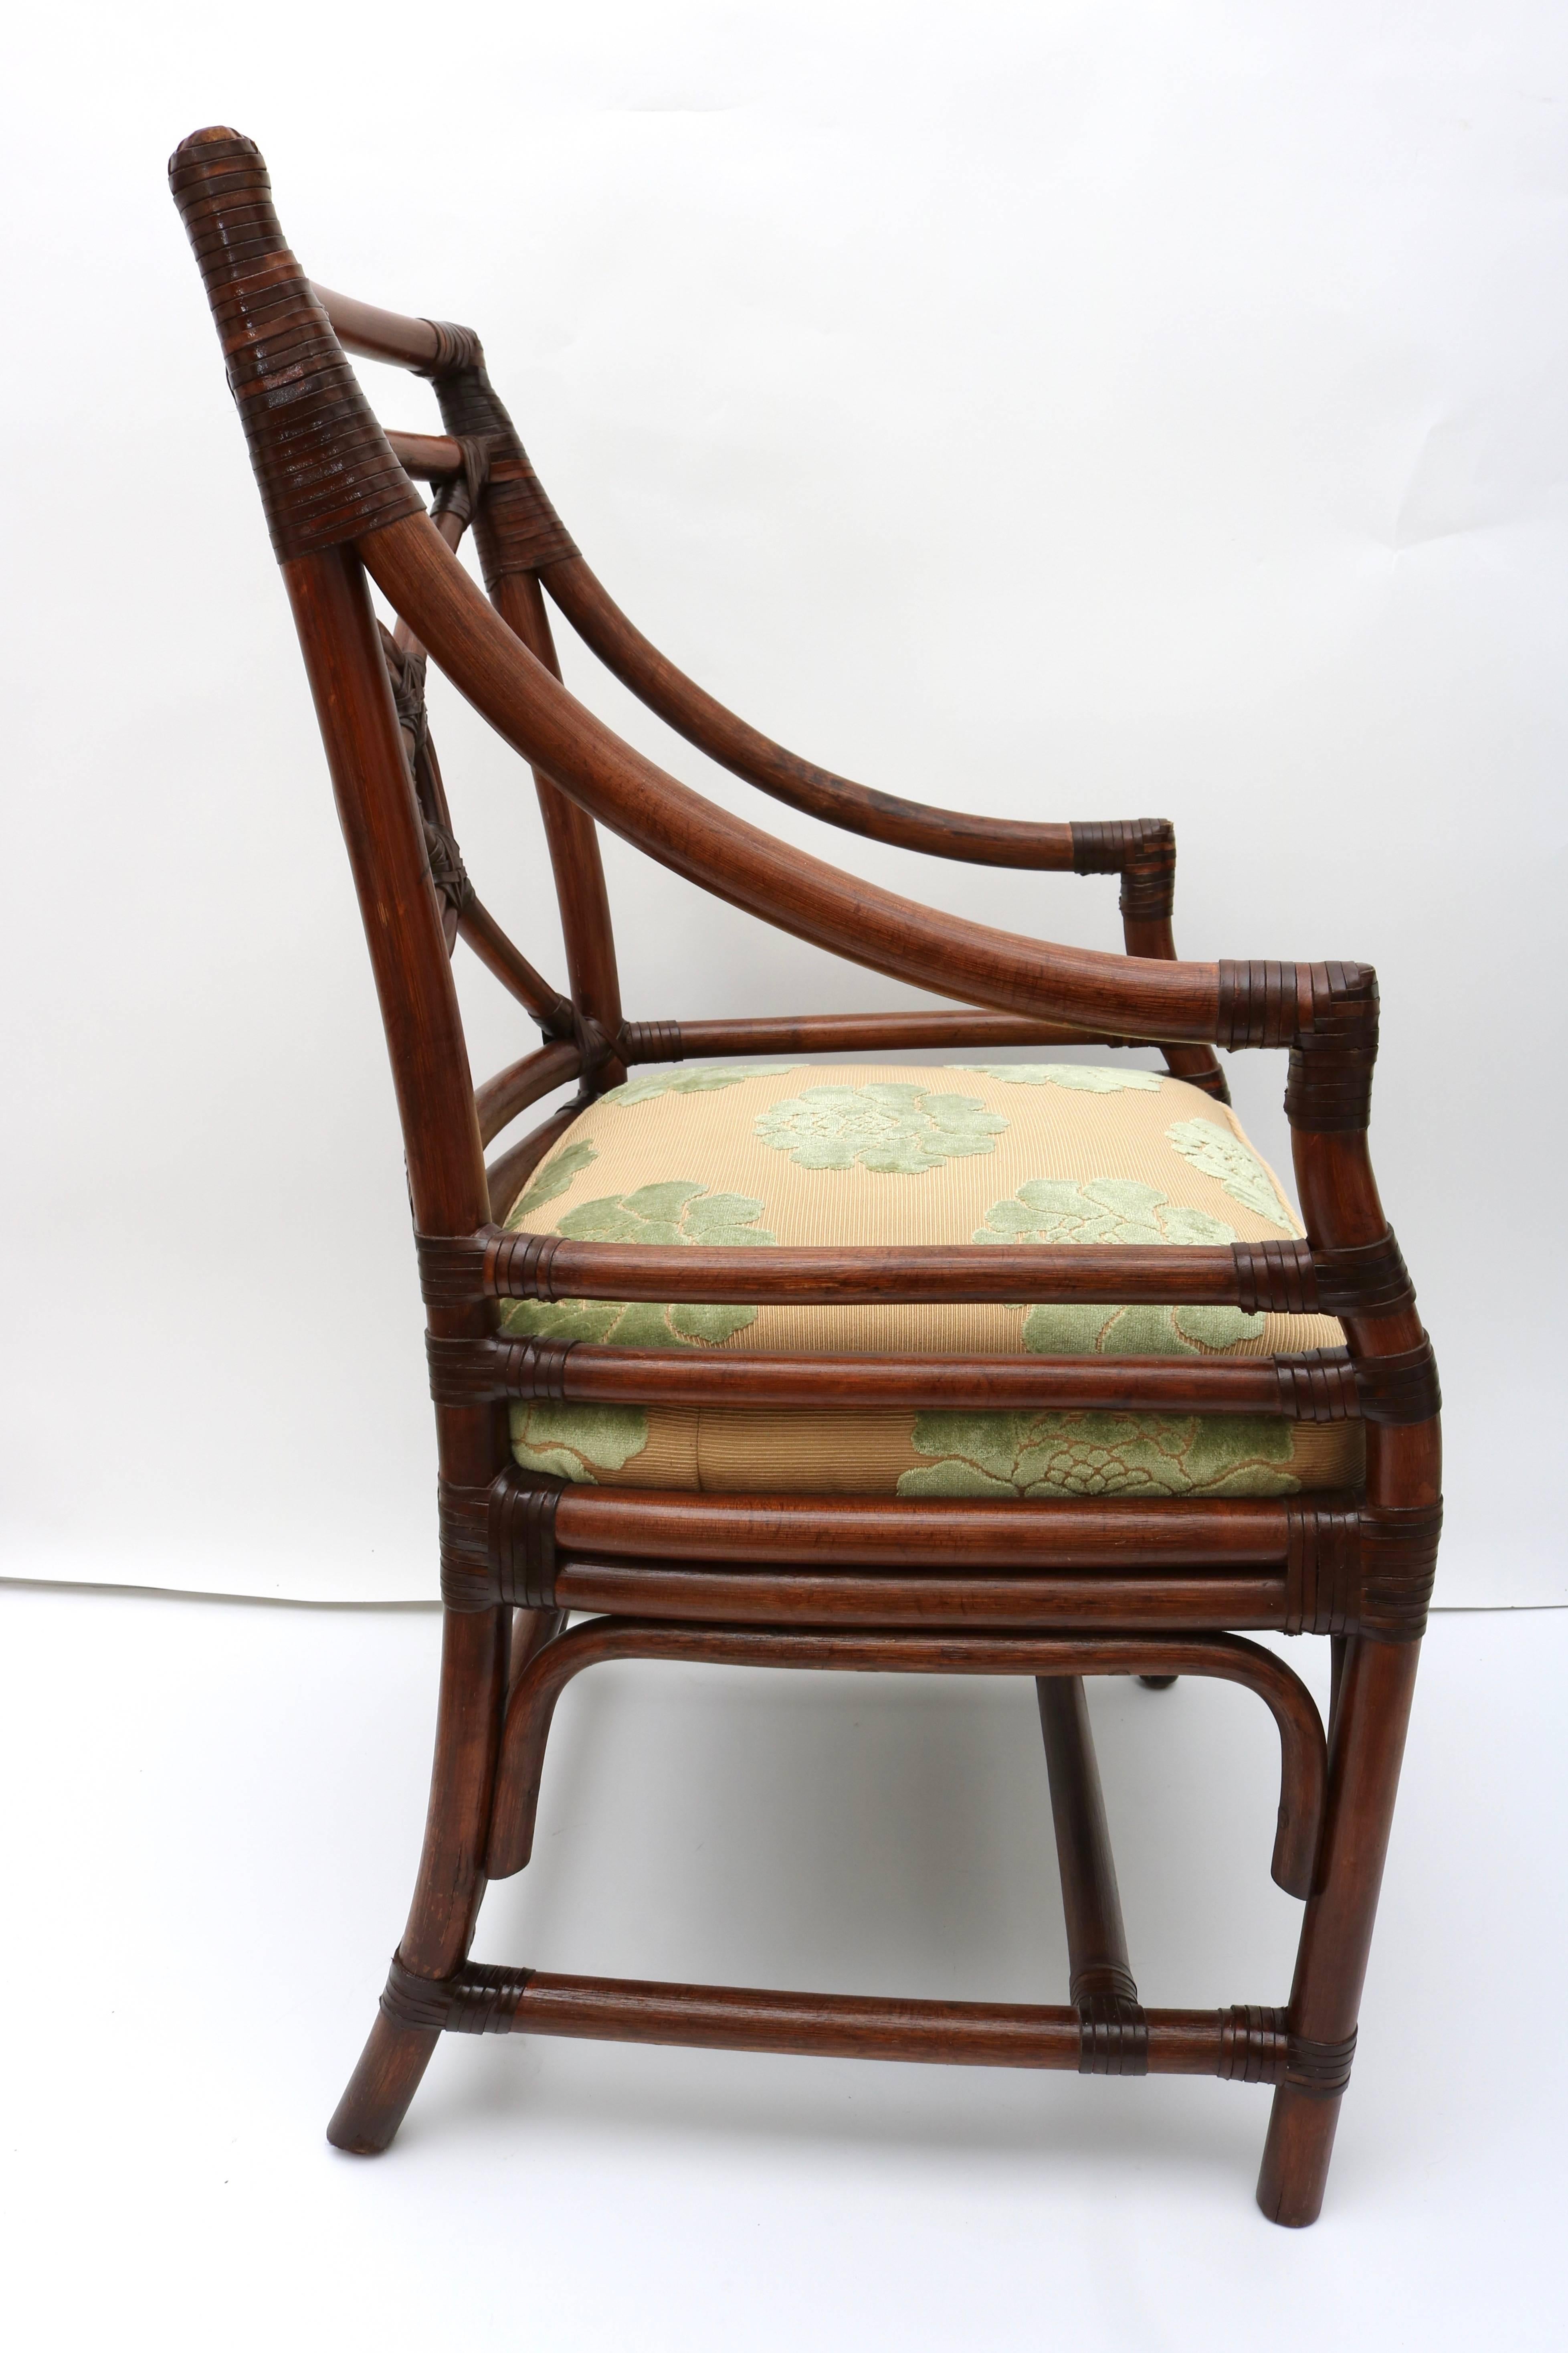 This pair of rattan chairs are by the iconic American firm of McGuire furniture and are in a tobacco colored finish with and upholstered seat fabric in butter-gold and celadon green.
 
For best net trade price or additional questions regarding